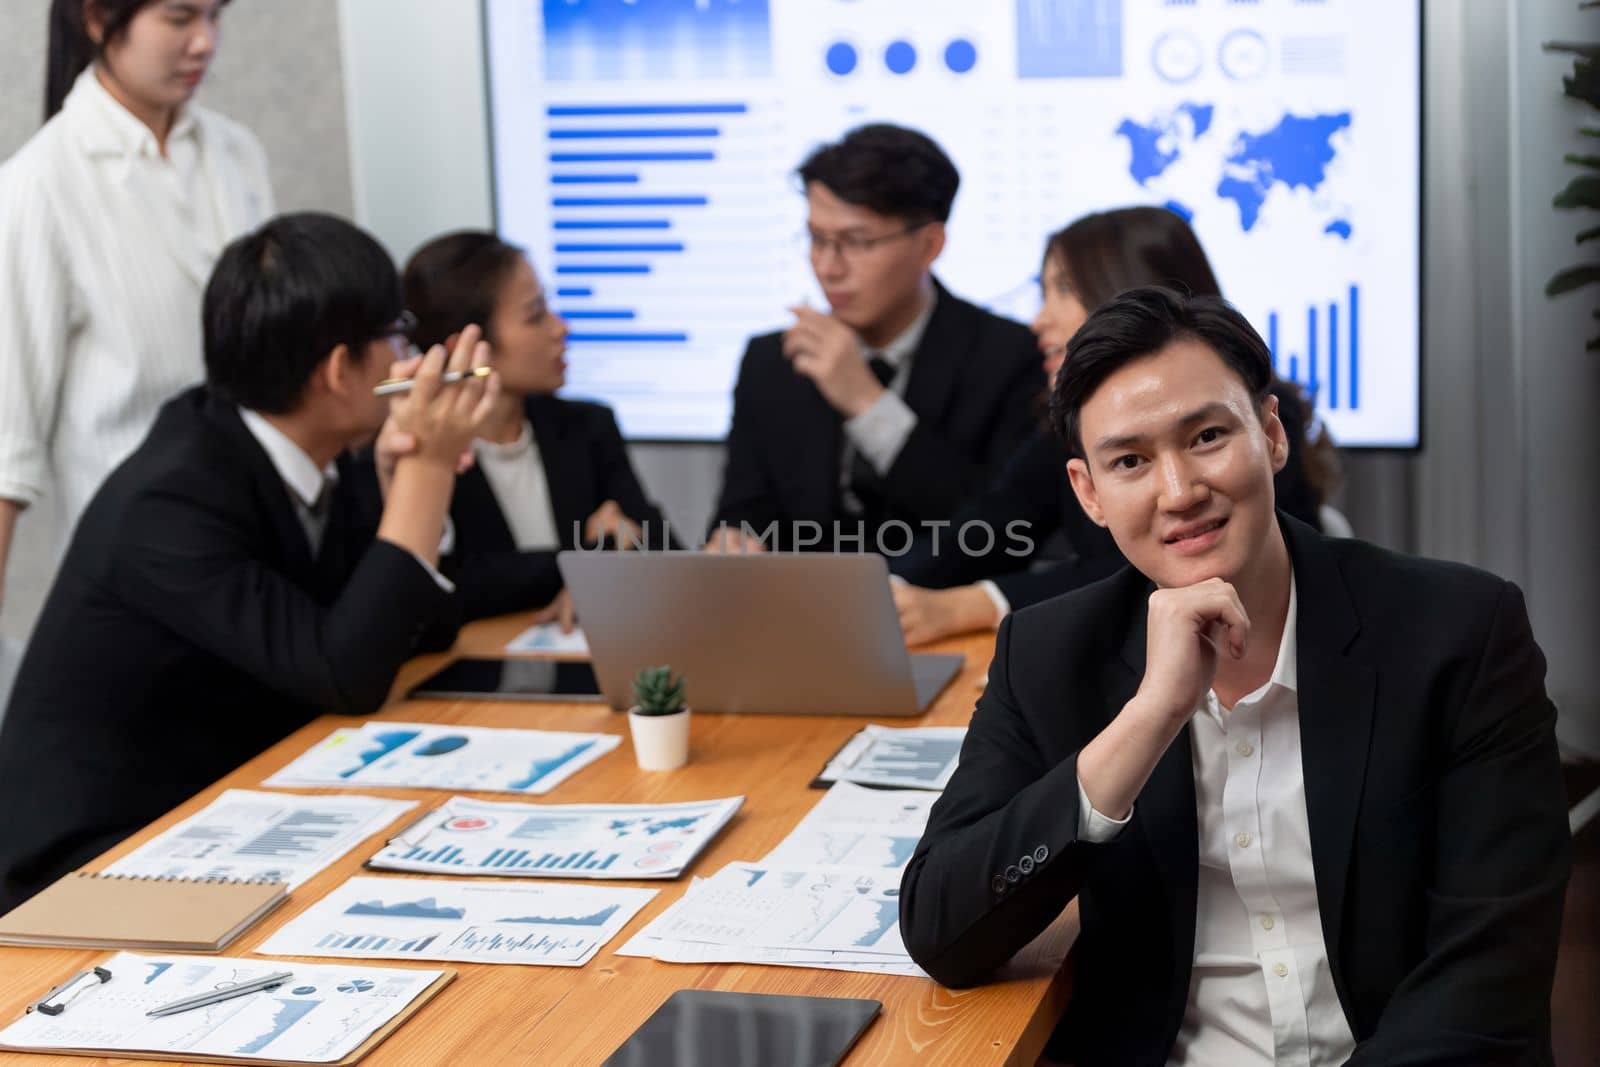 Focus portrait of successful confident male manager or executive in business wear with blurred background of businesspeople, colleagues working with financial report papers in office of harmony.